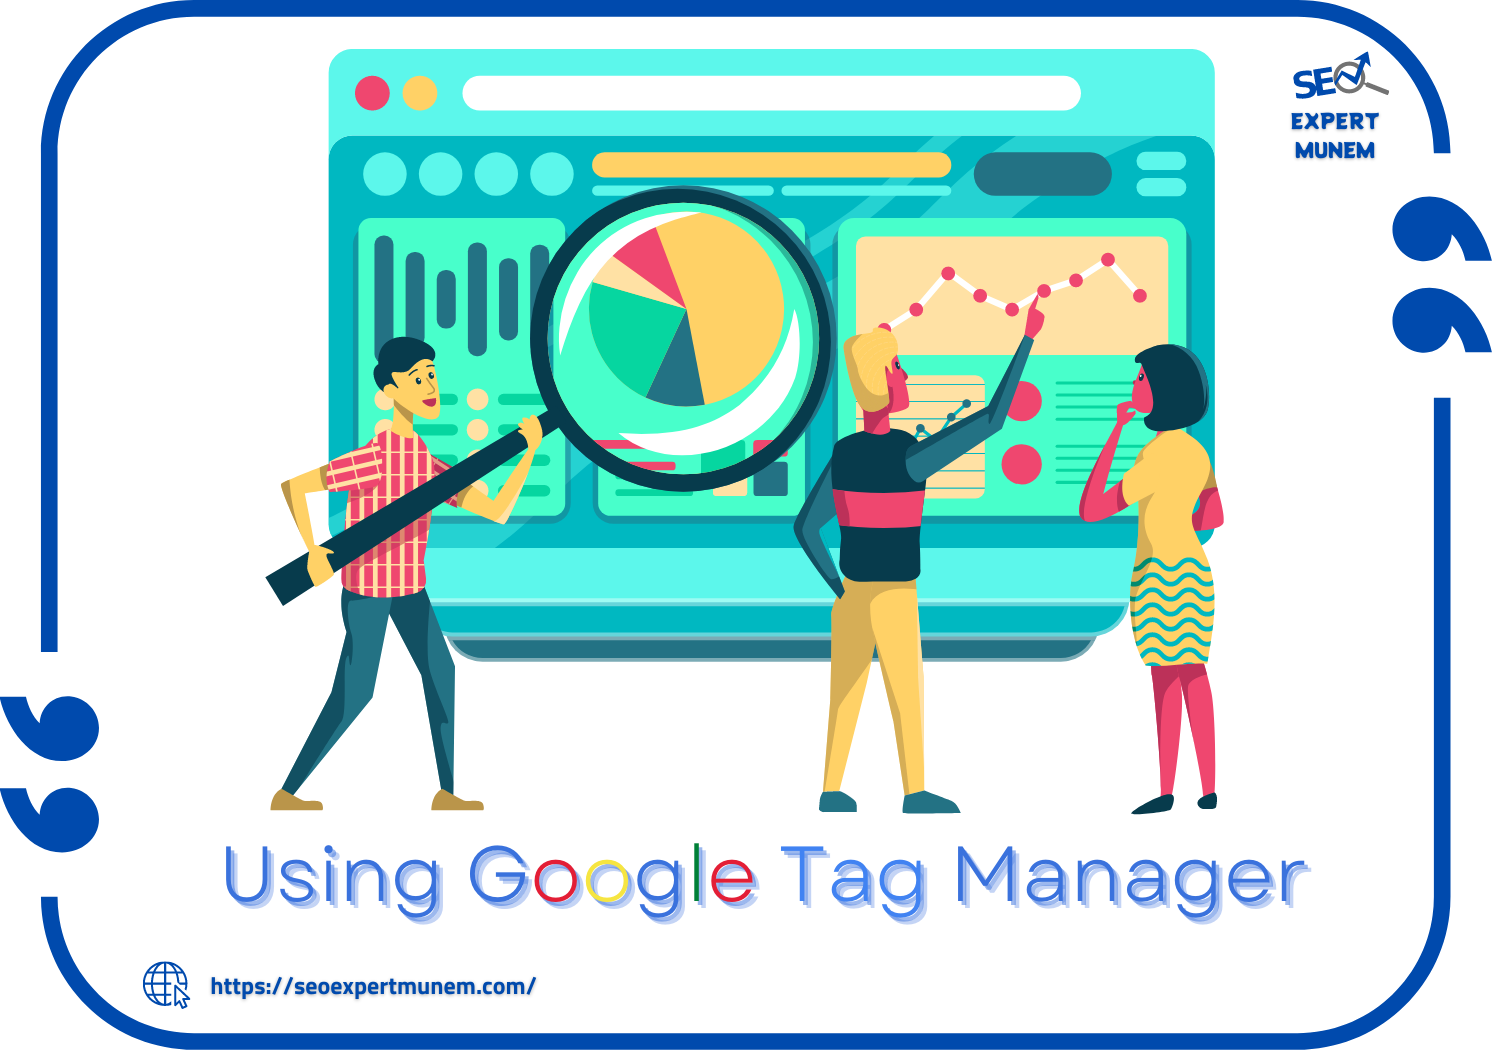 Using Google Tag Manager